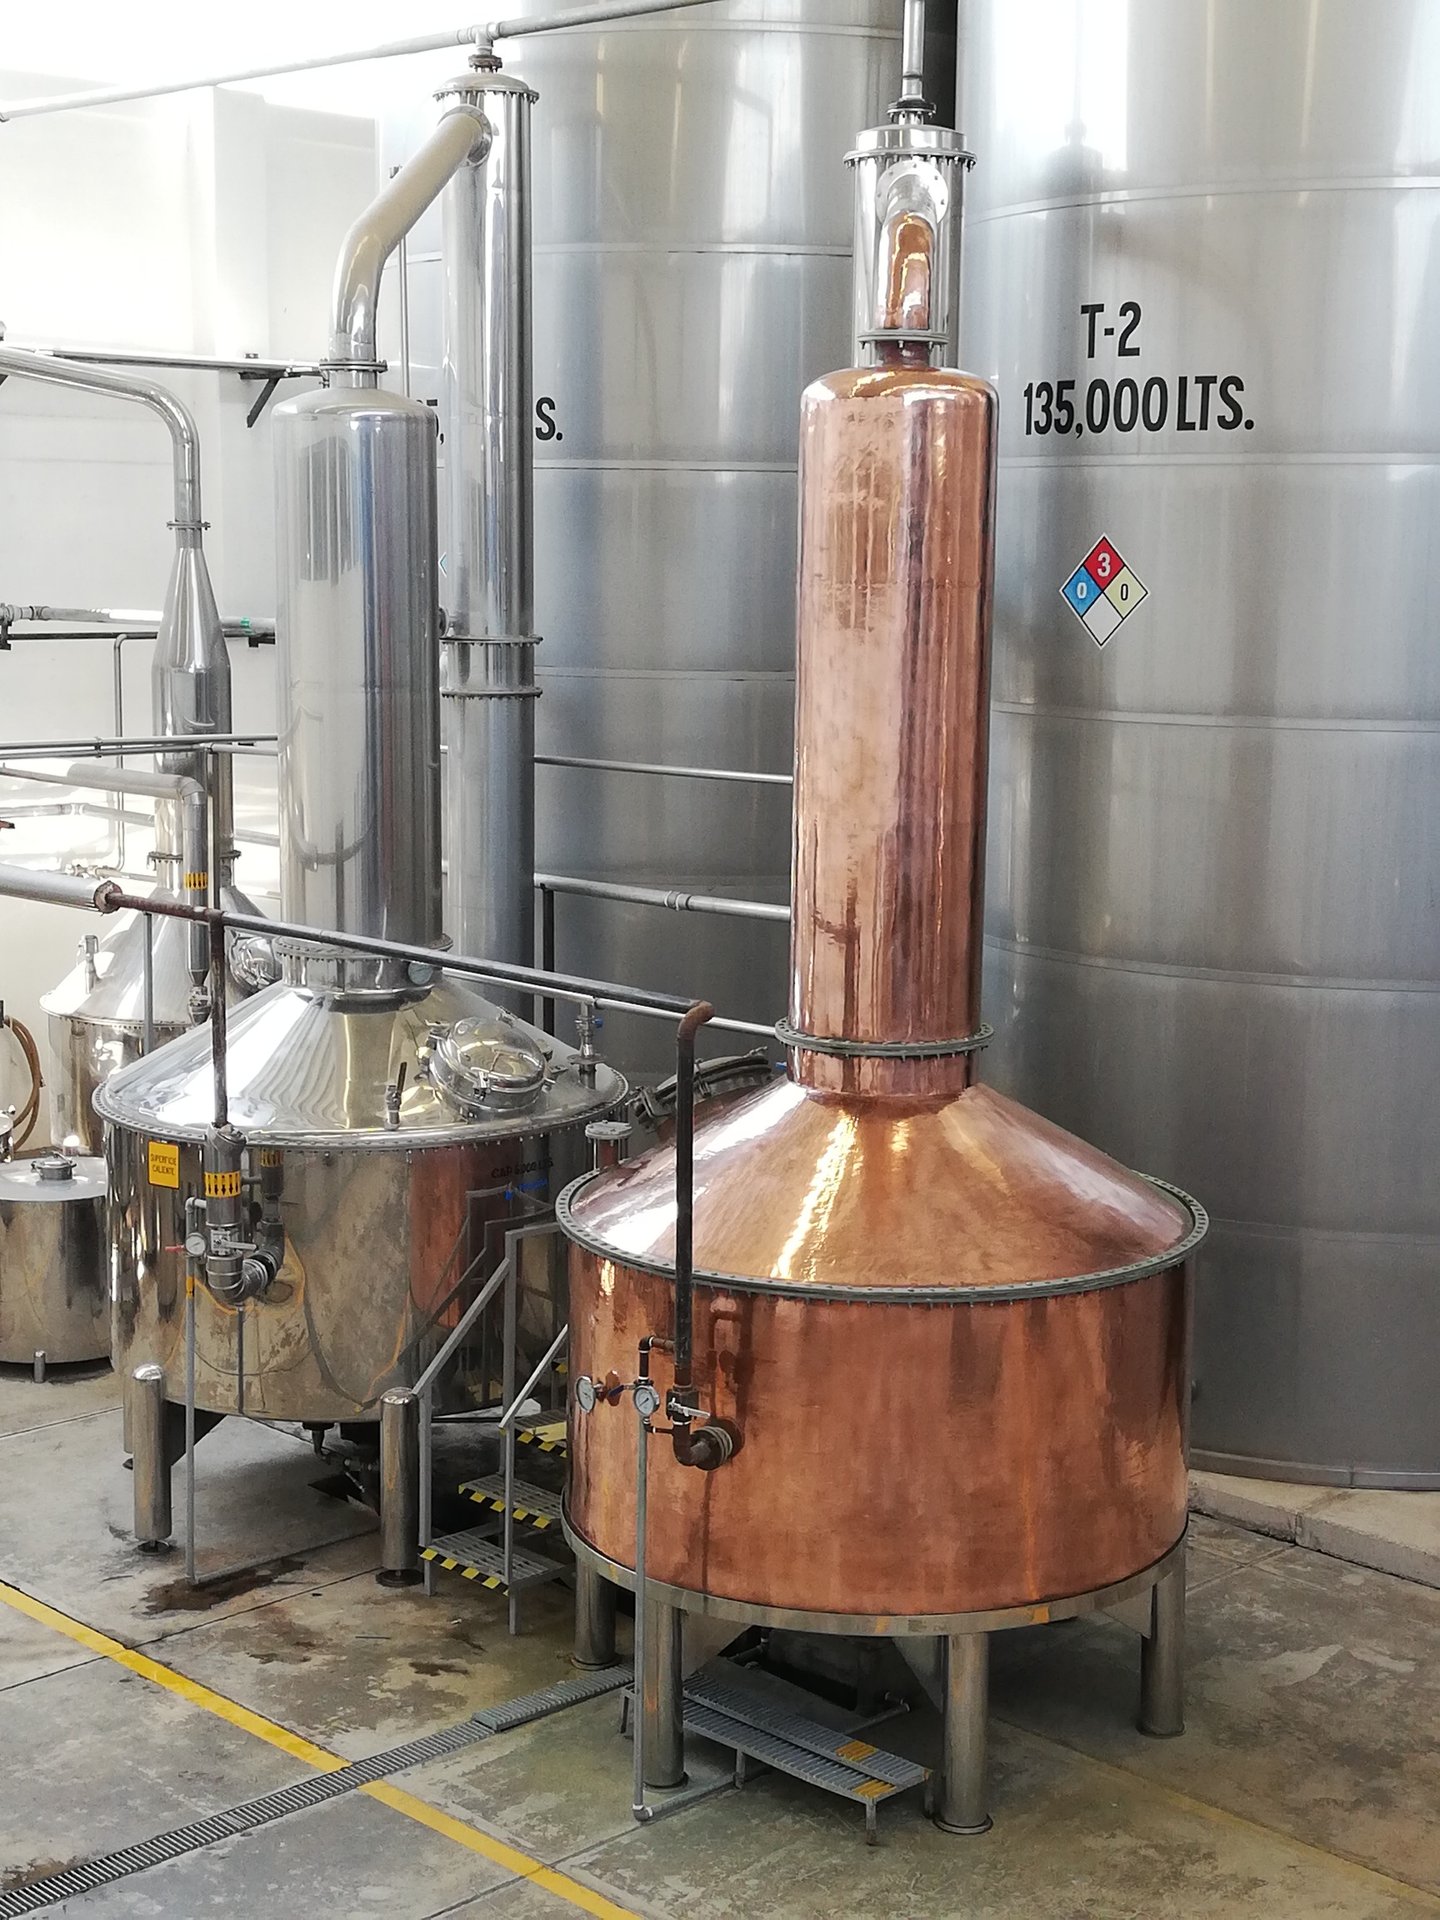 New copper alambique successfully installed at Fabrica De Tequilas Finos